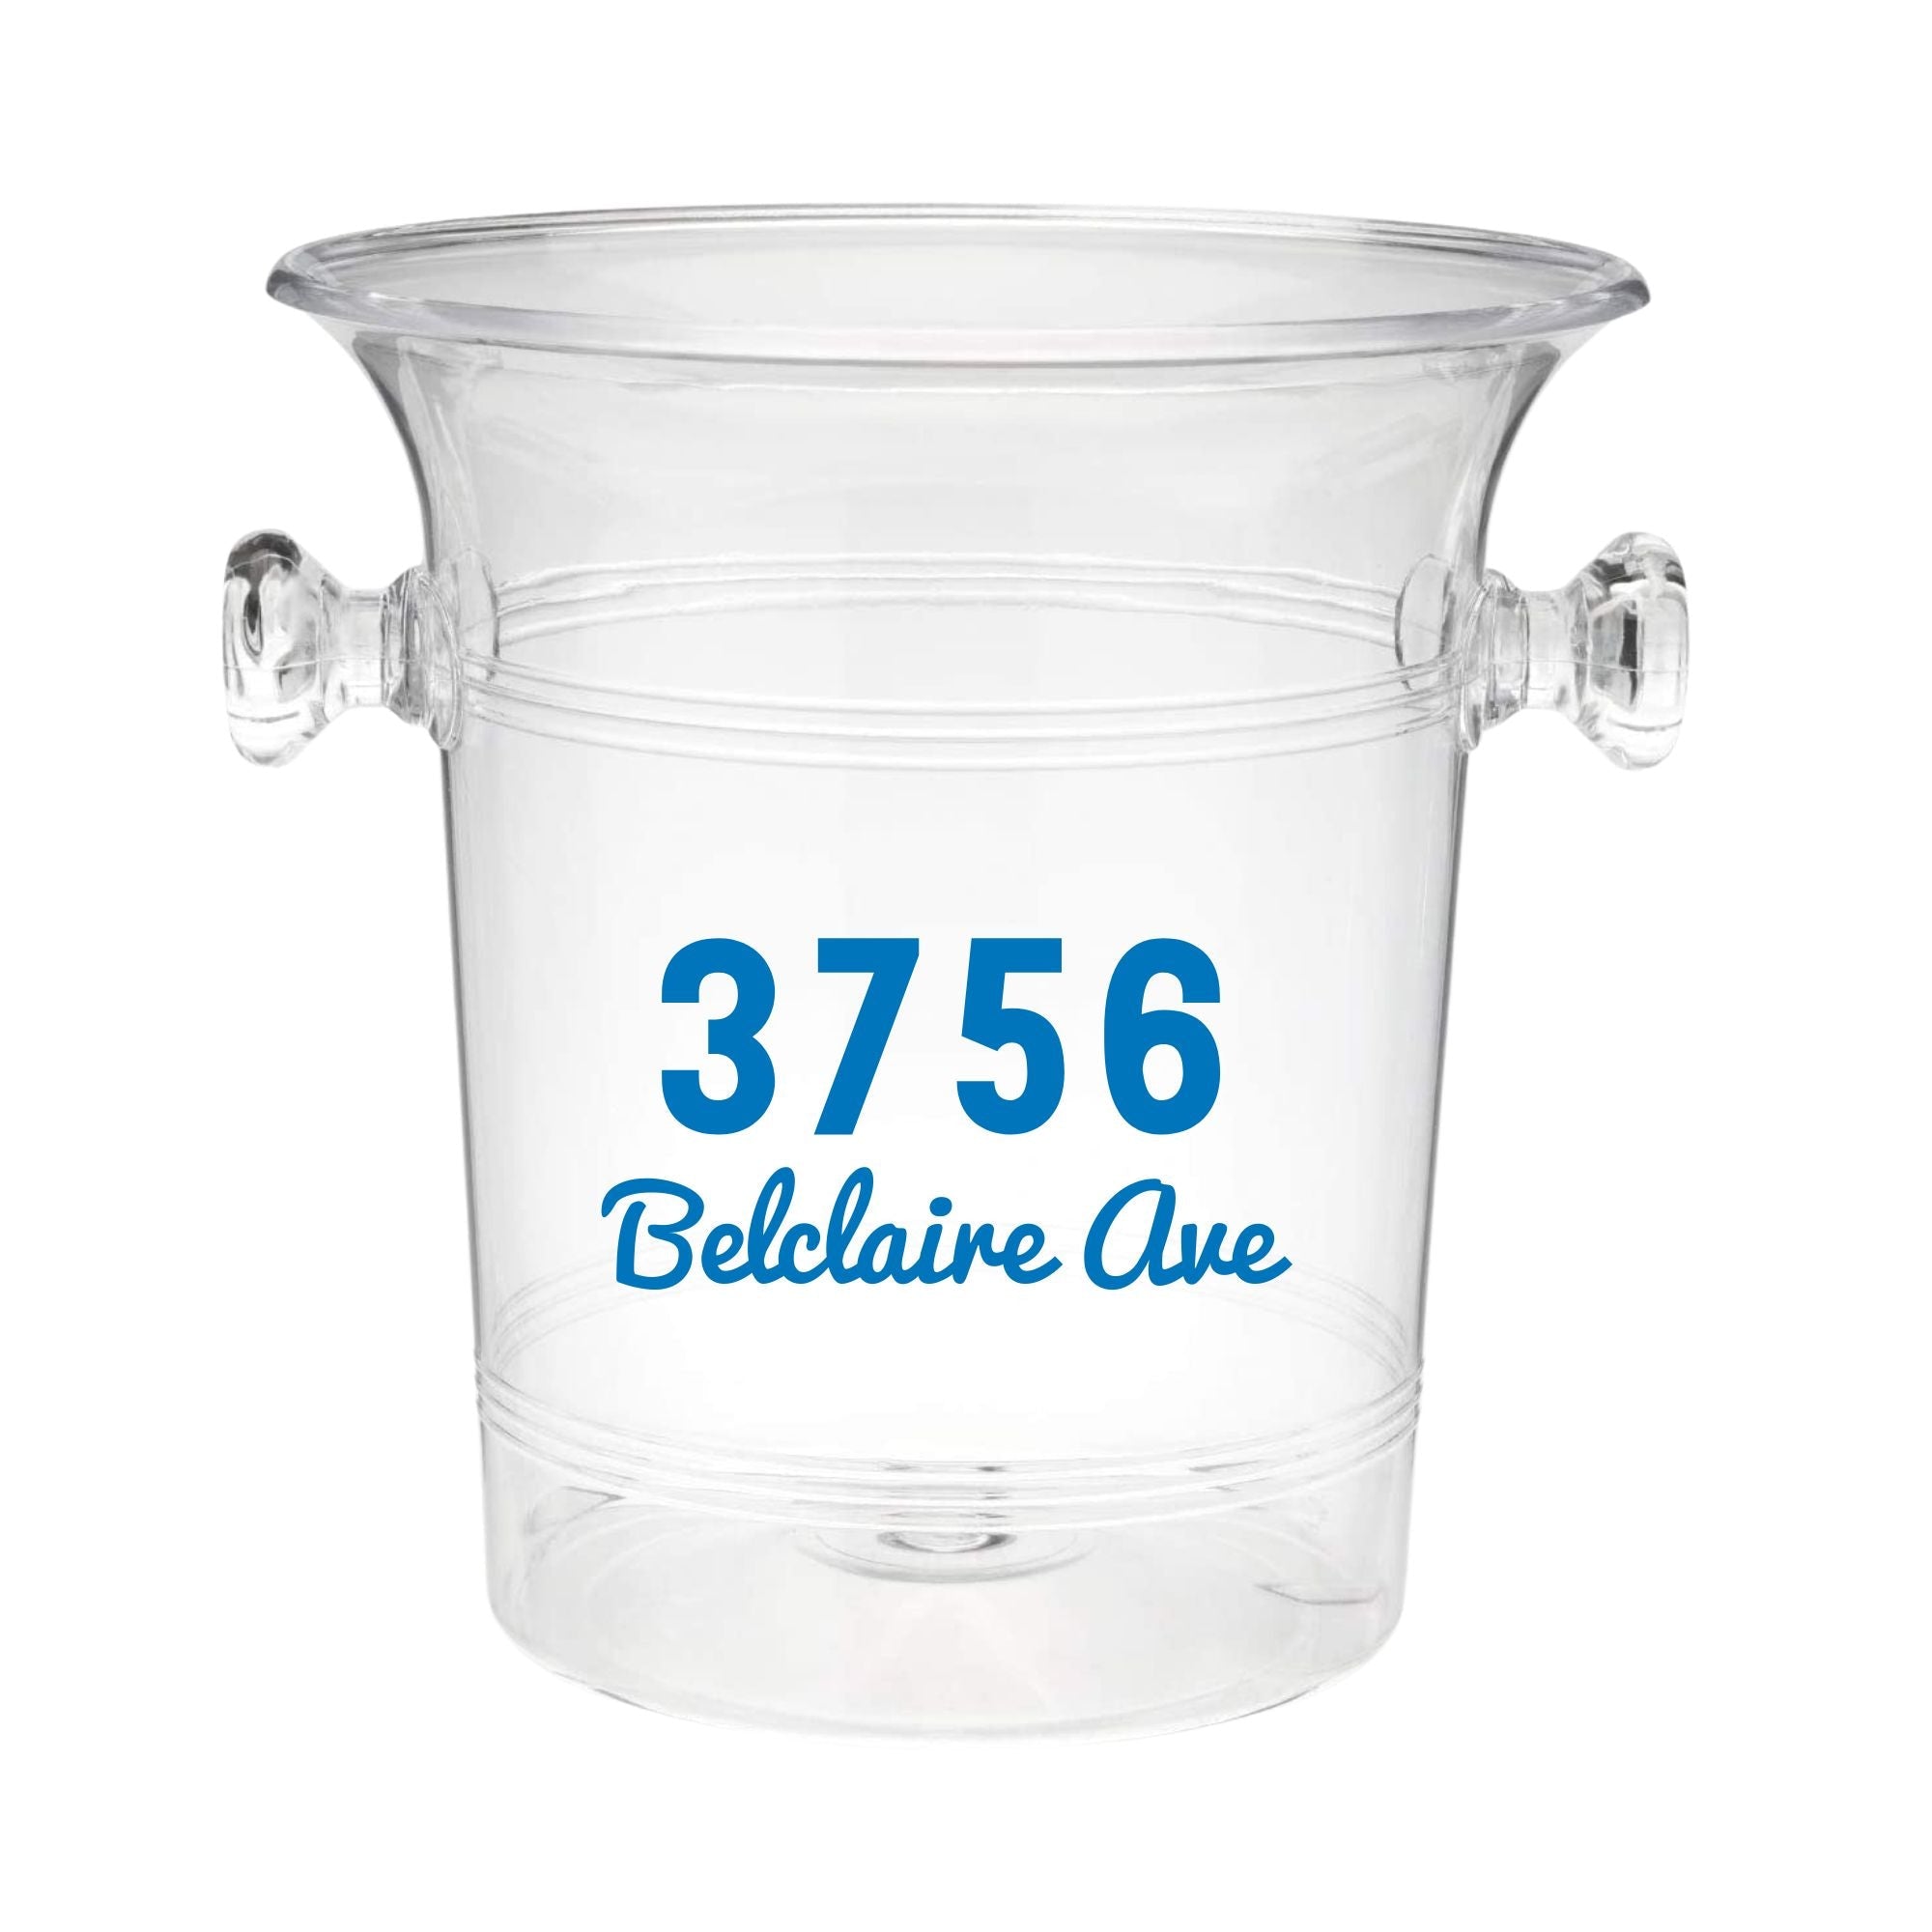 A clear acrylic ice bucket features a custom address on the front in pink lettering